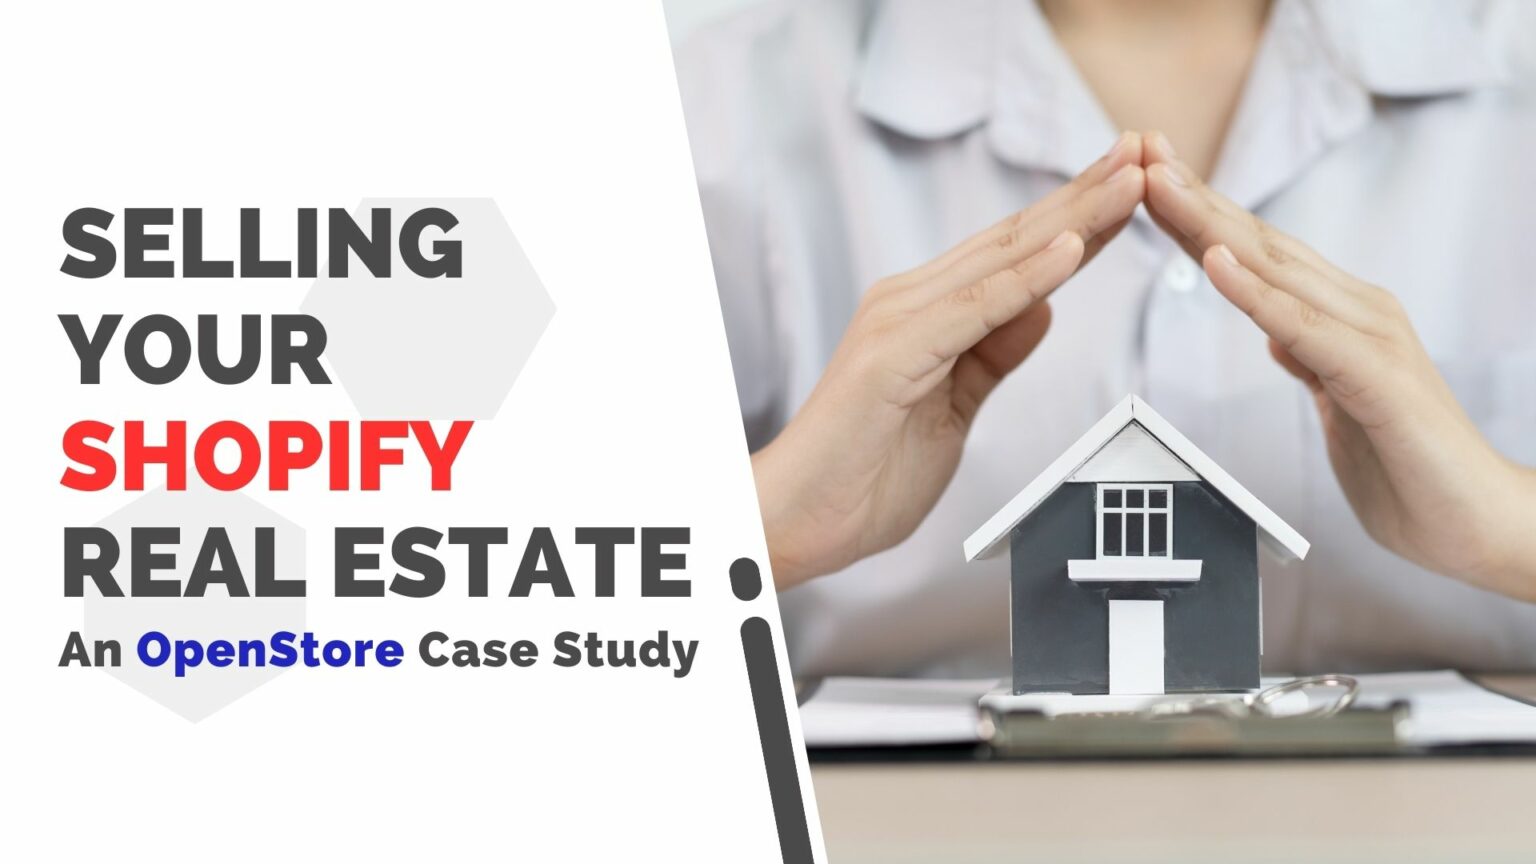 Selling Your Shopify Real Estate: An OpenStore Case Study